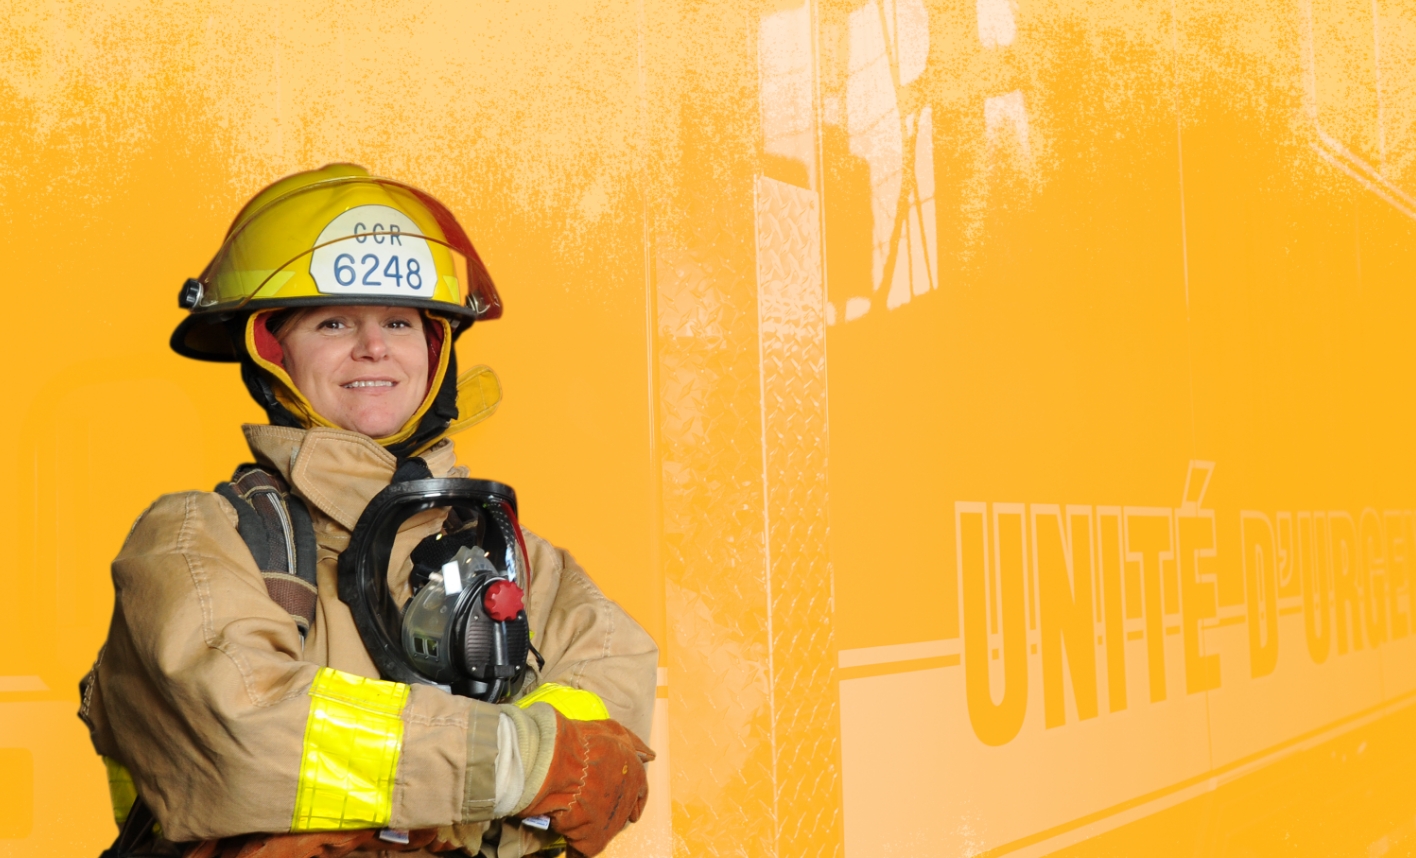 Smiling firefighter in